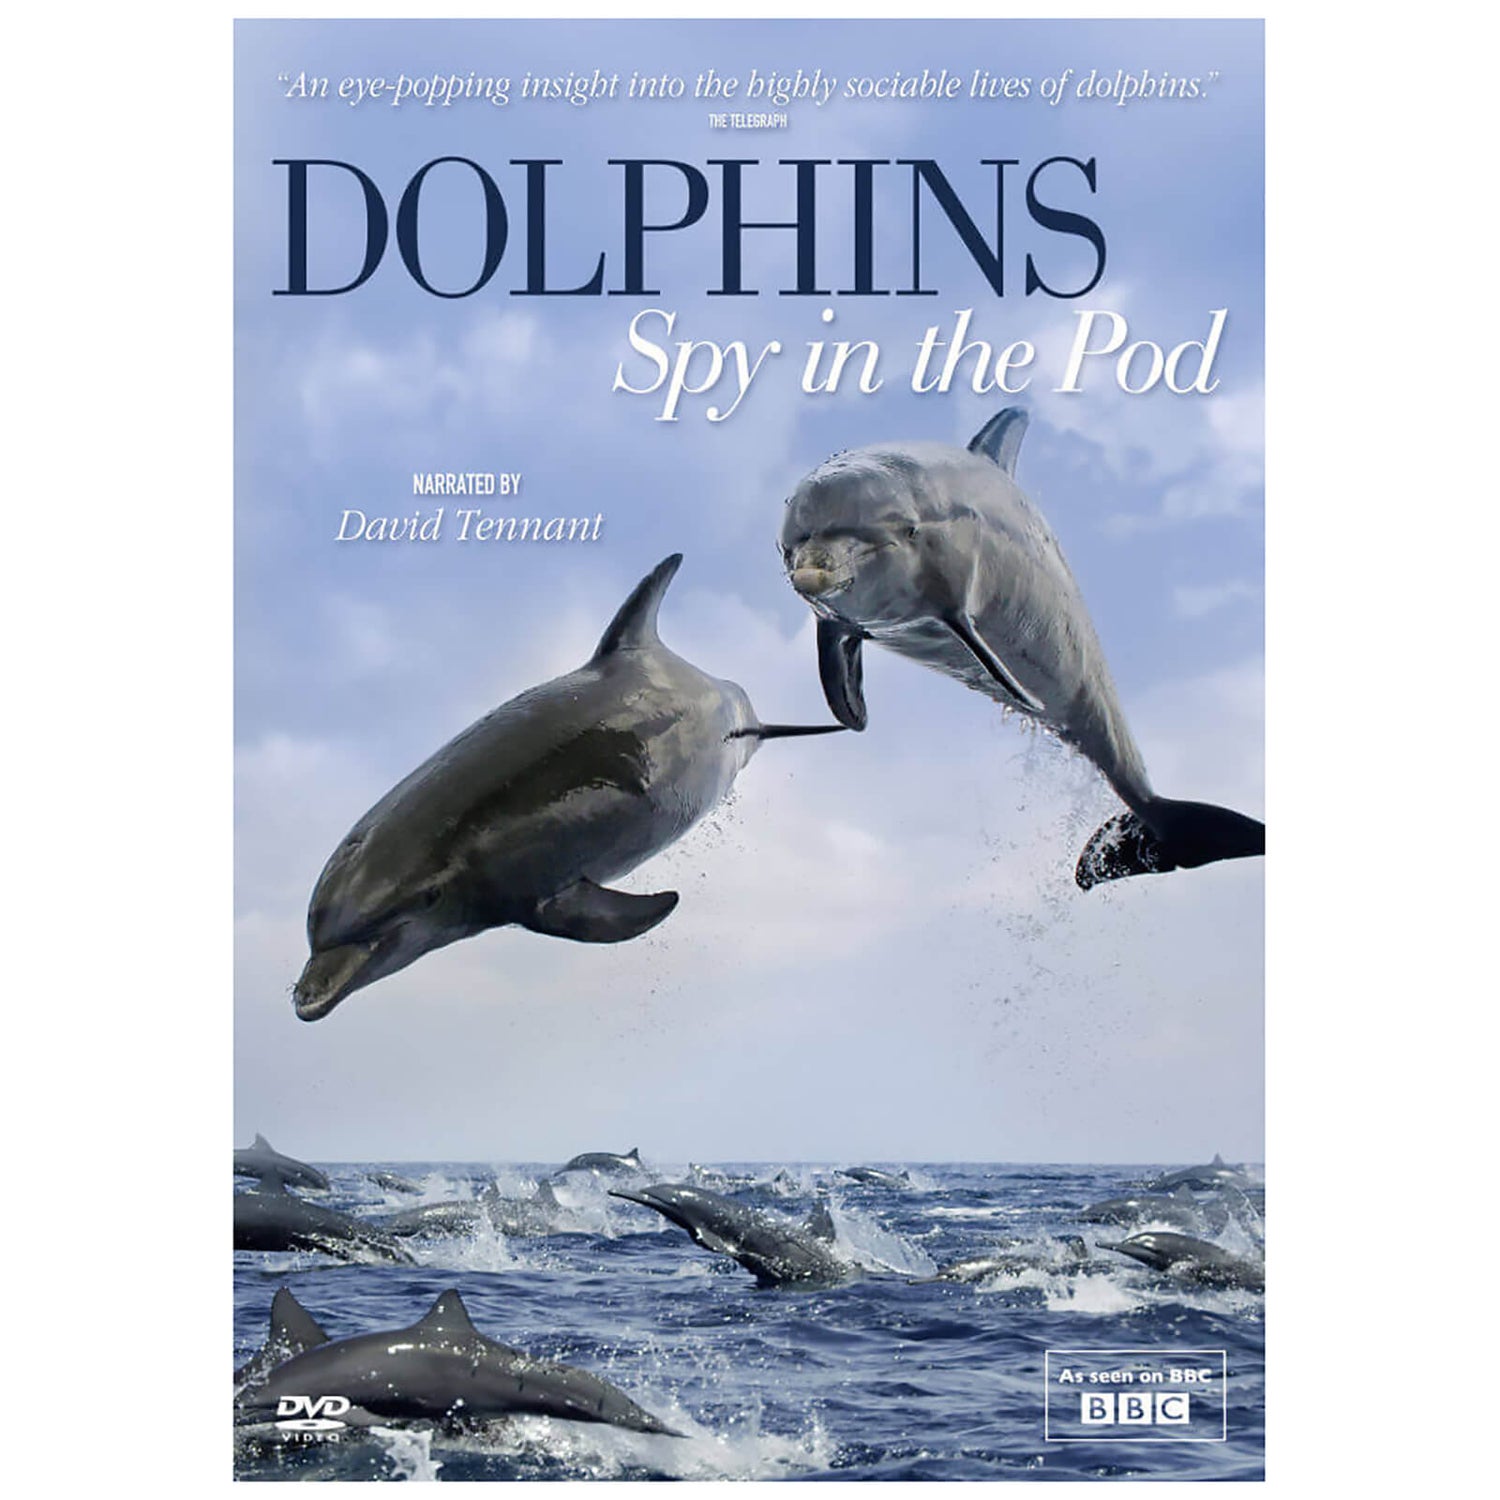 Dolphins Spy in the Pod